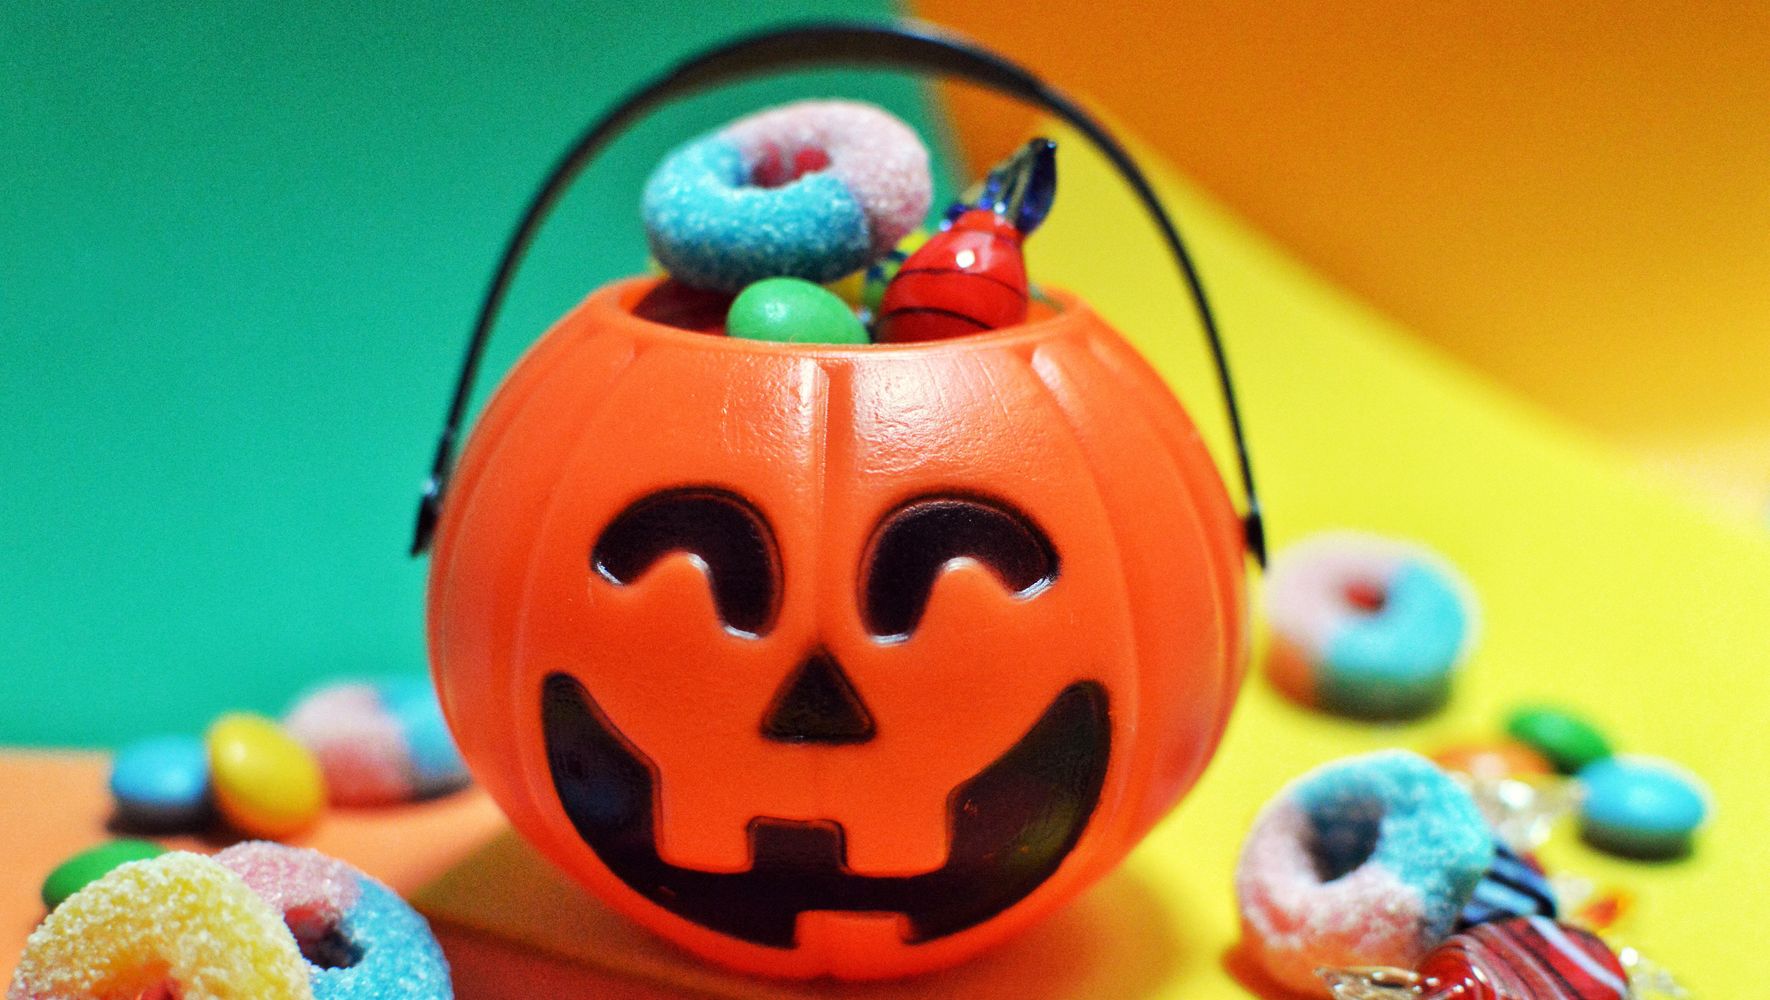 Even Nutritionists Don't Advise Giving Out 'Healthy' Halloween Candy. Here's Why.